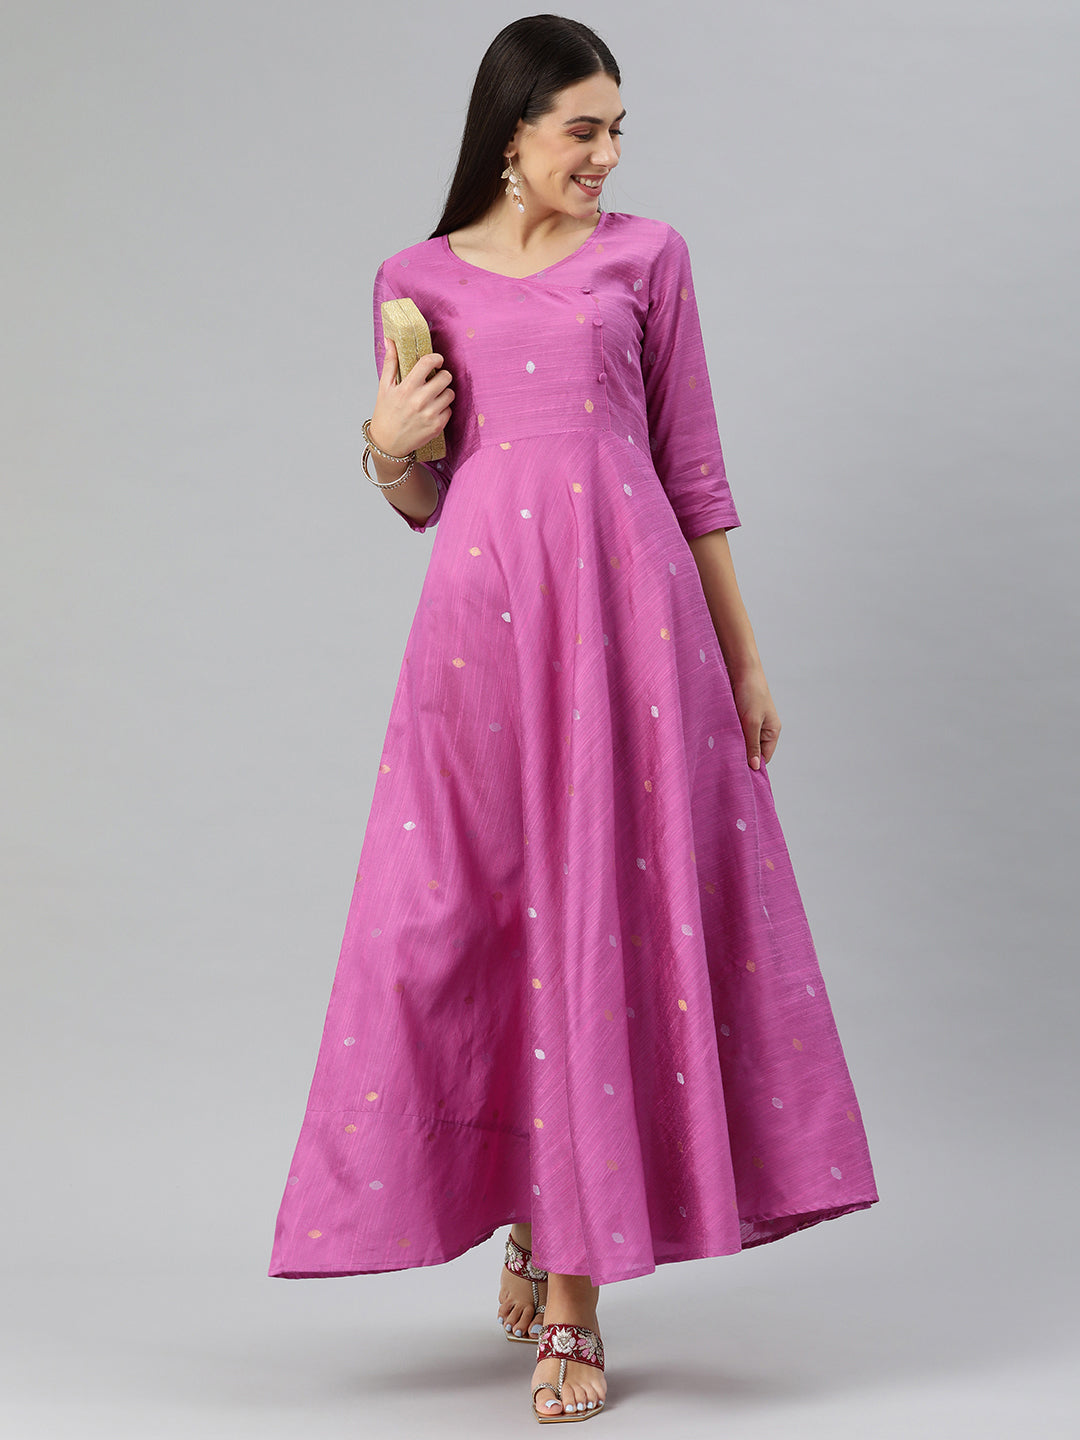 fcity.in - A Women Traditional Ethnic Long Anarkali Gown And Maxi Dress  Made Of